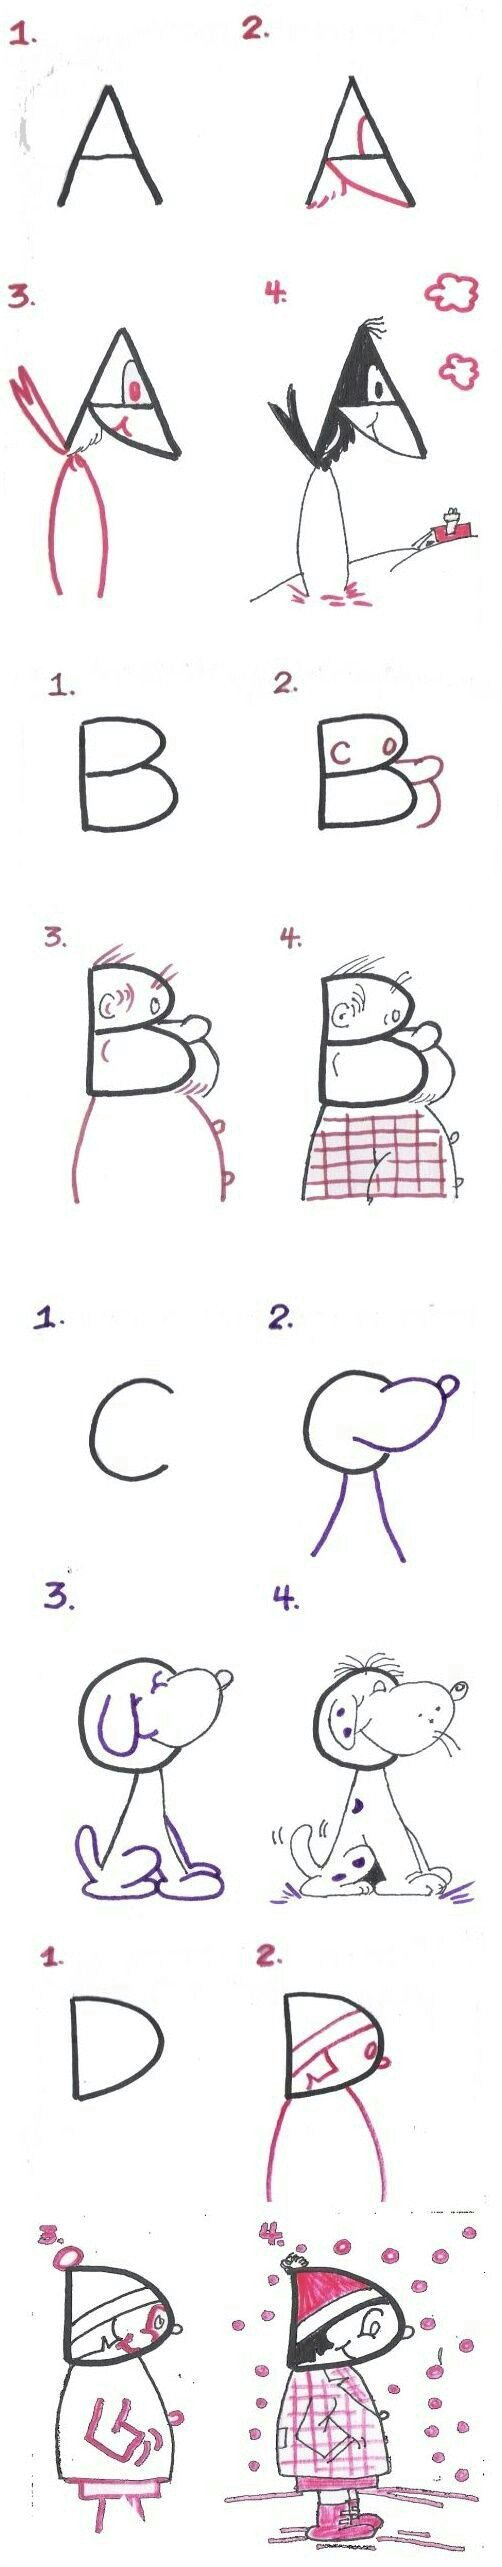 easy step by step art drawings to practice